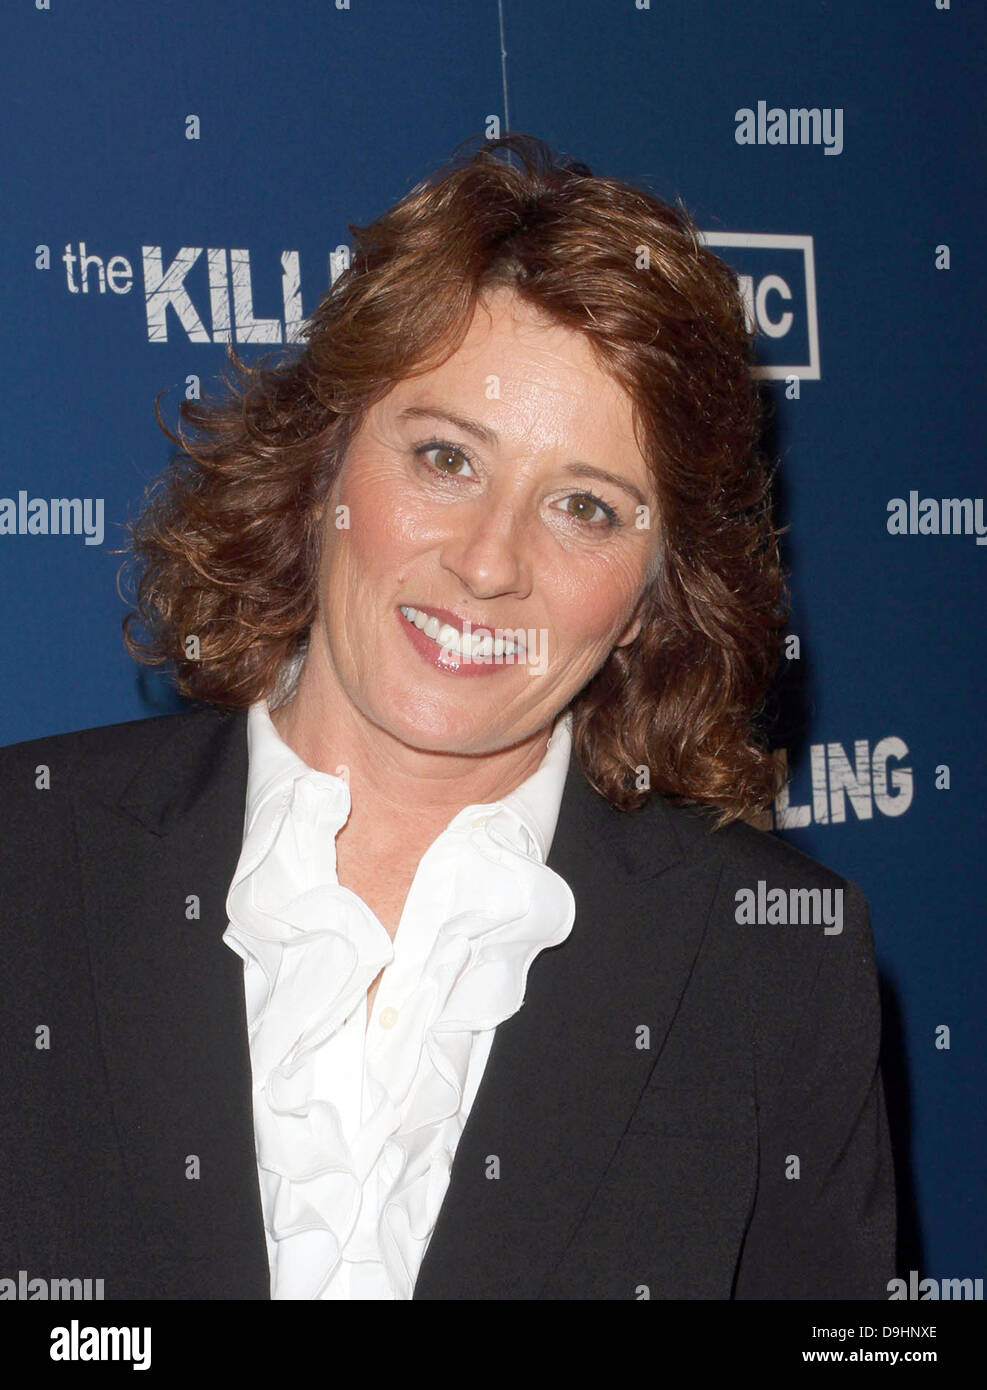 Annie Corley Premiere Of AMC's Series 'The Killing' held at the Harmony Gold Theater Los Angeles, California - 21.03.11 Stock Photo